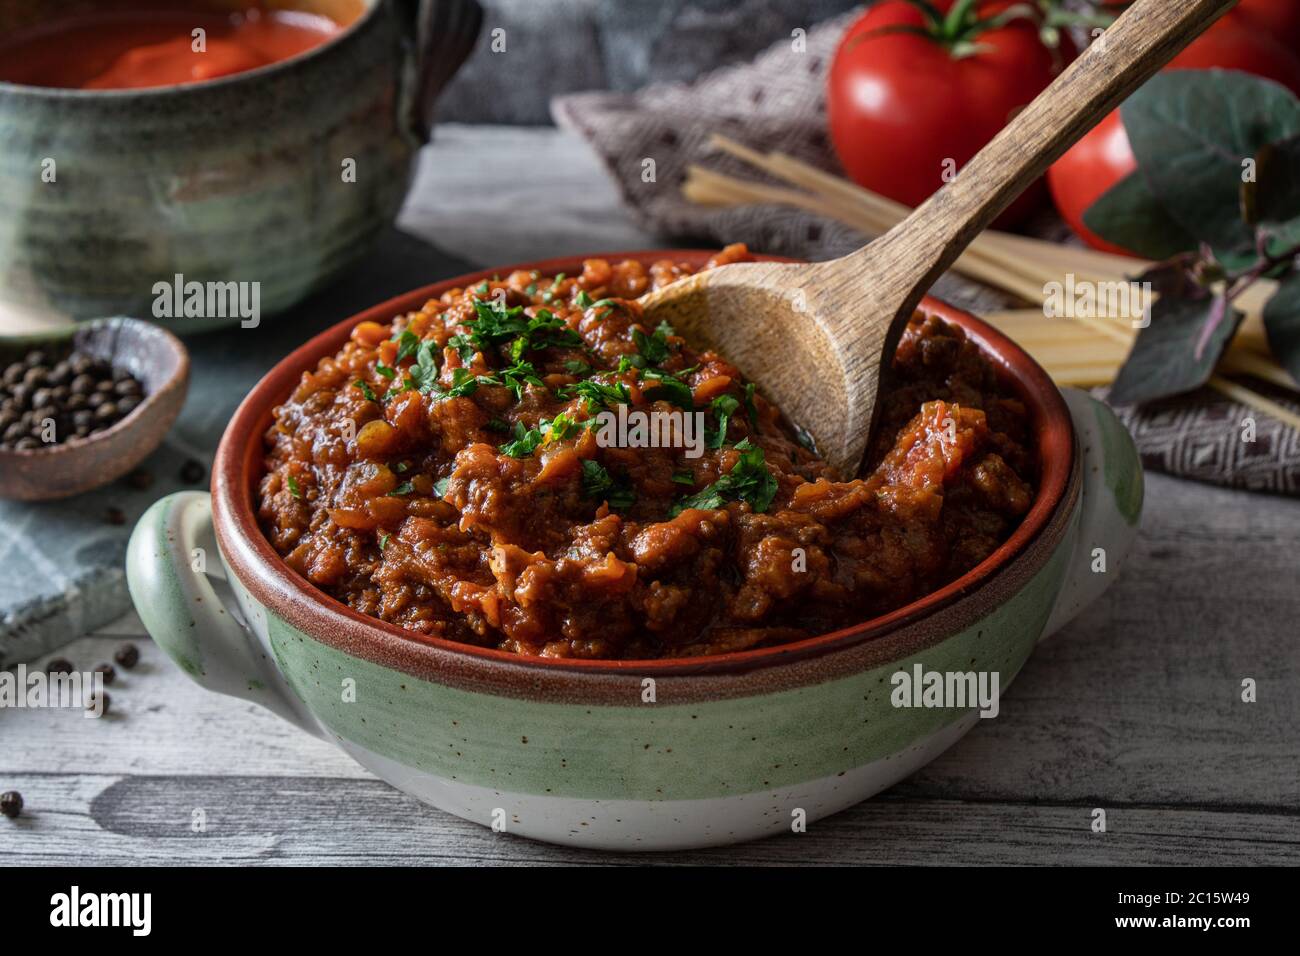 Bolognese tomato and beef sauce in rustic bowl. Traditional Italian sauce used for pasta. Stock Photo